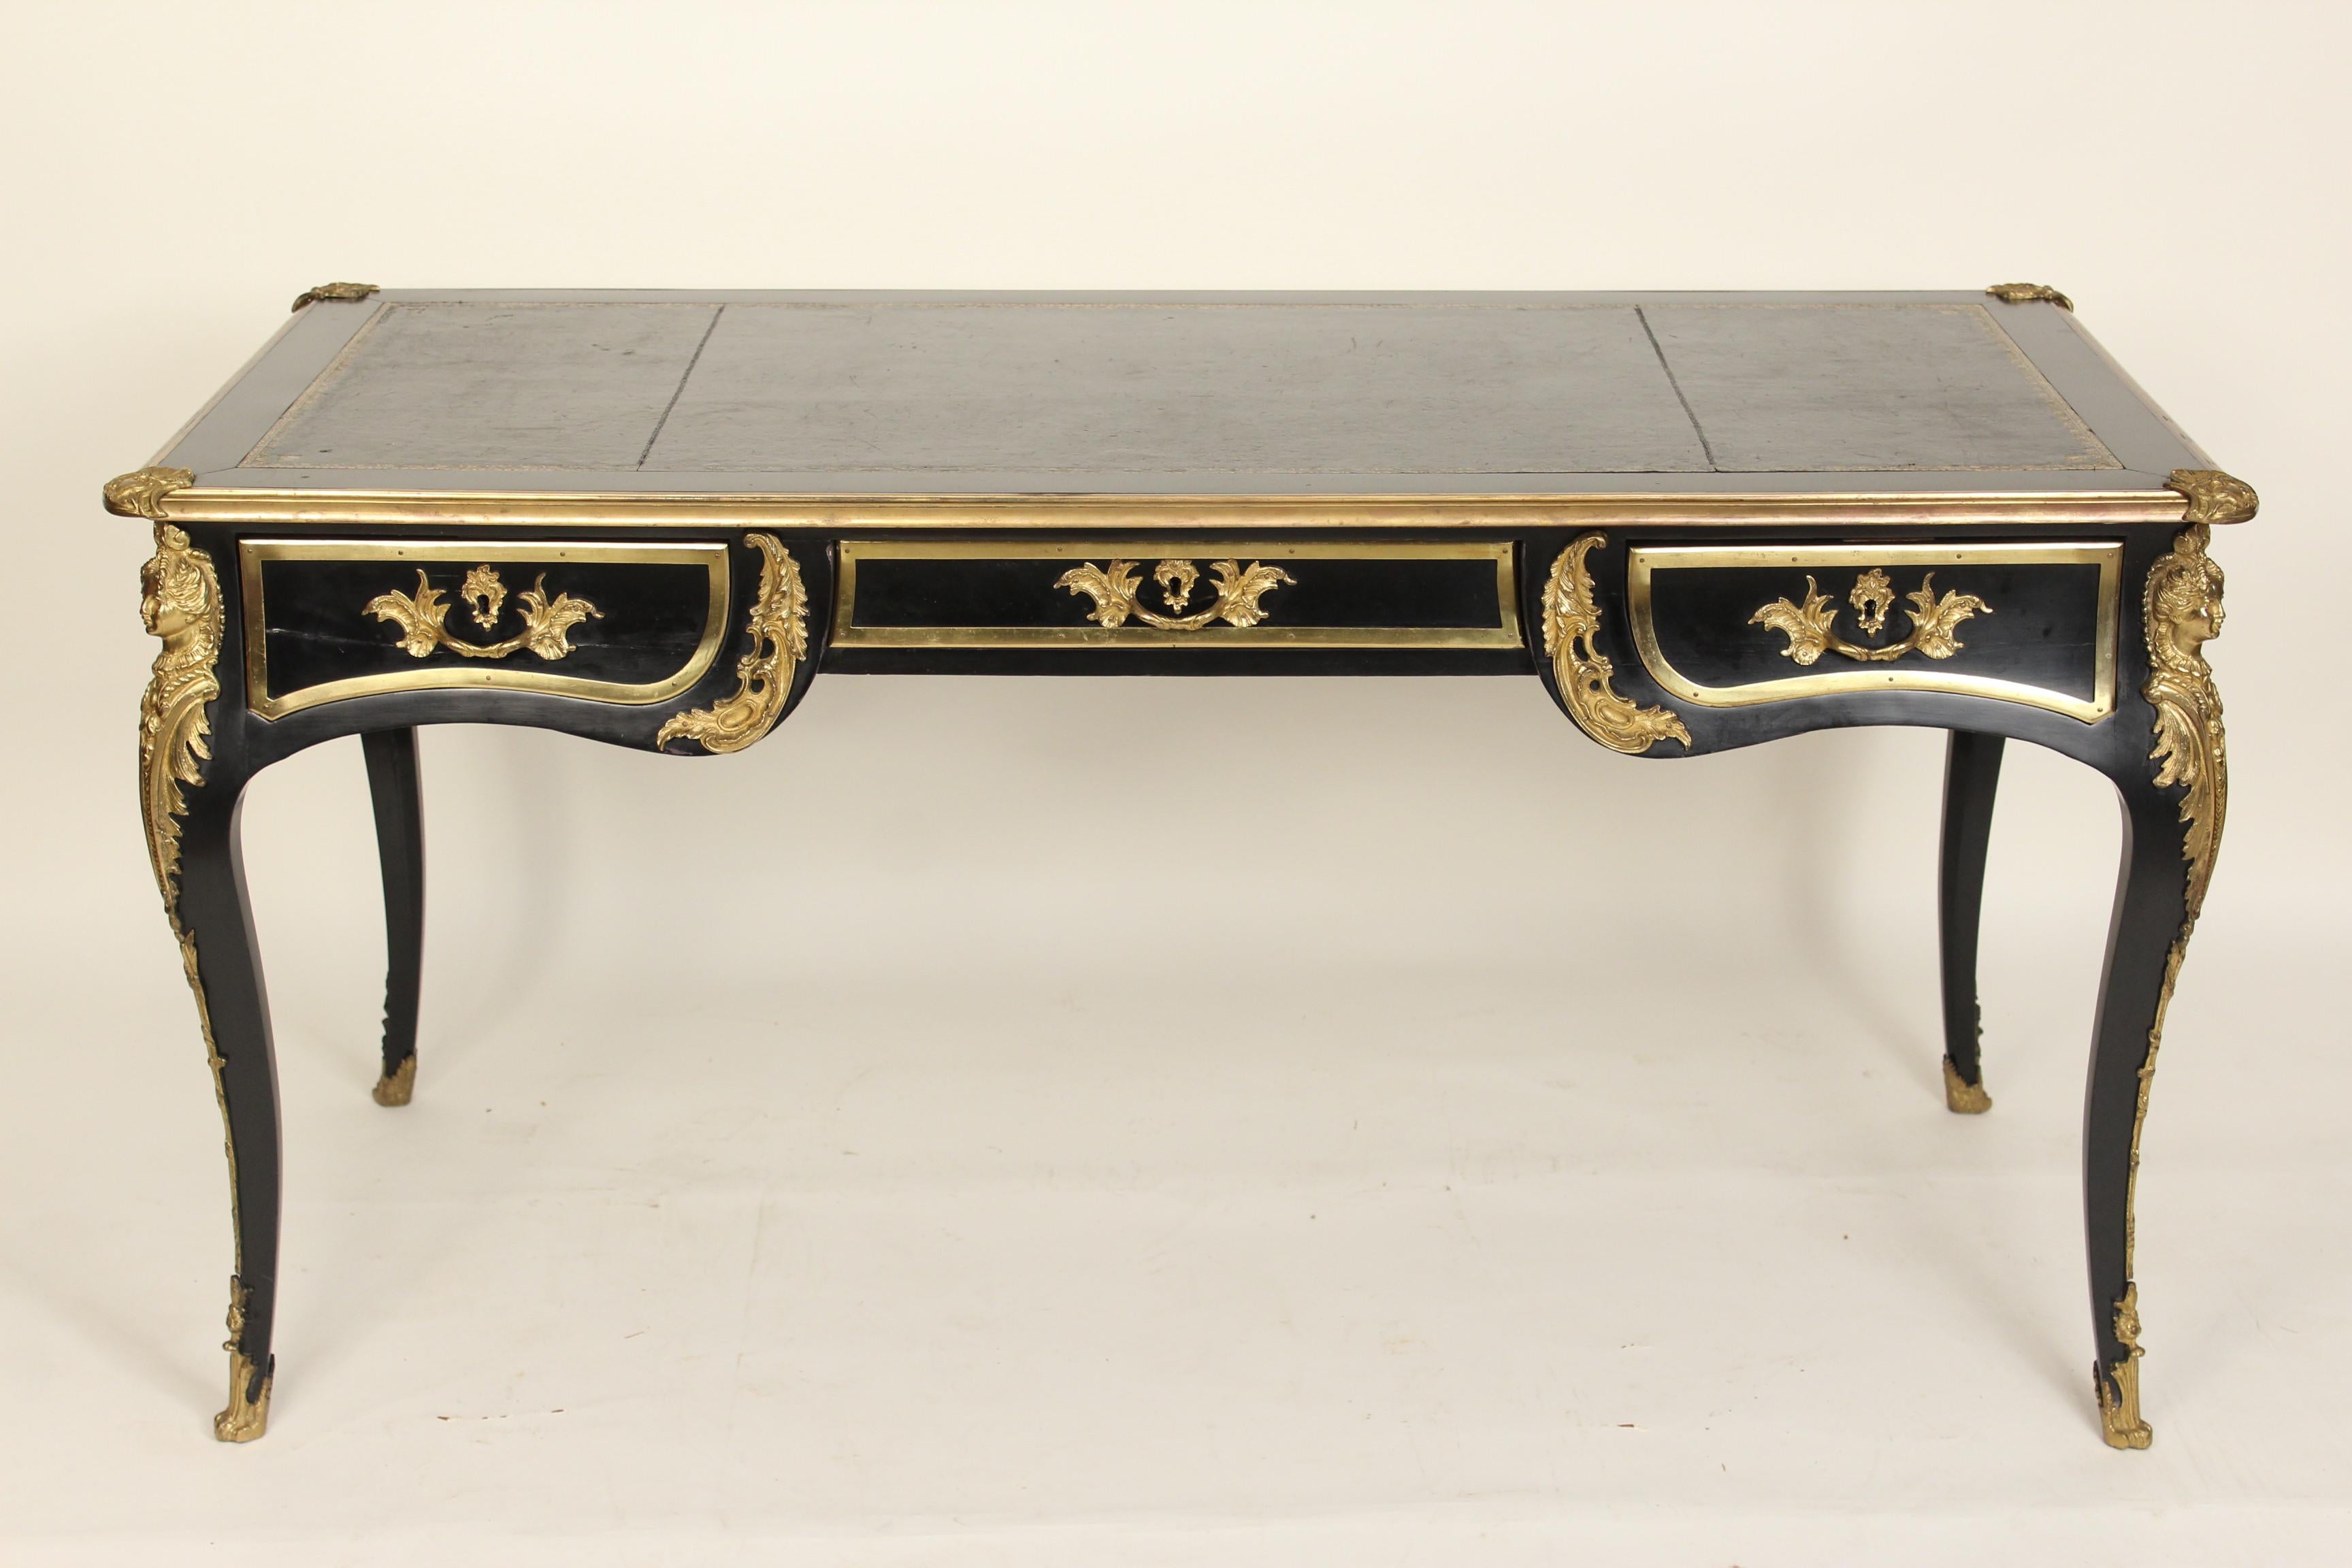 Louis XV style black lacquer desk with gilt bronze mounts and a tooled leather top, circa 1970s. Probably made in Spain.